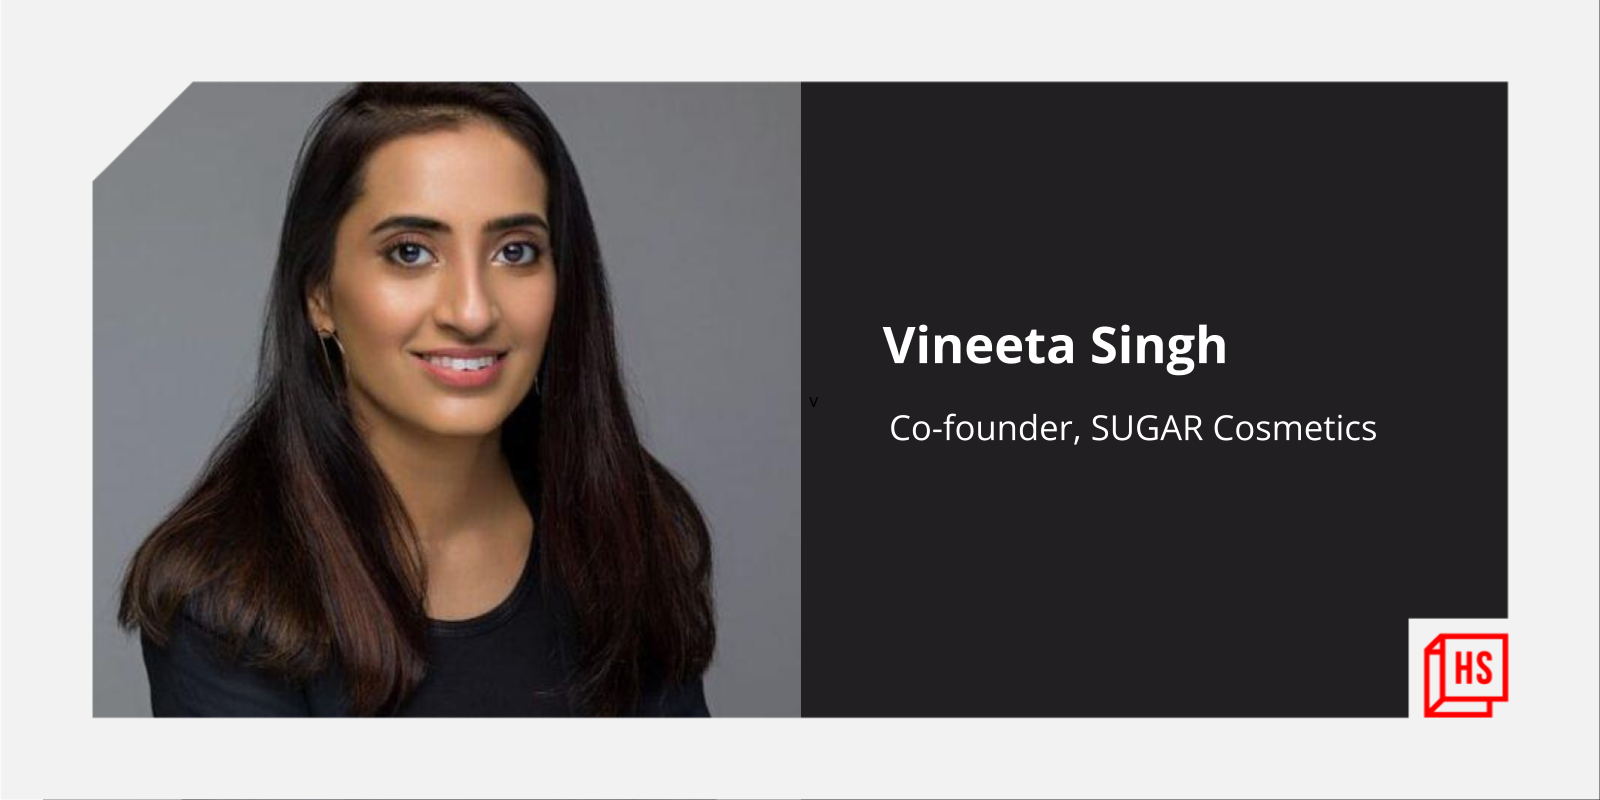 Vineeta Singh’s Instagram is a goldmine for lessons in entrepreneurship. Here are our favourites
